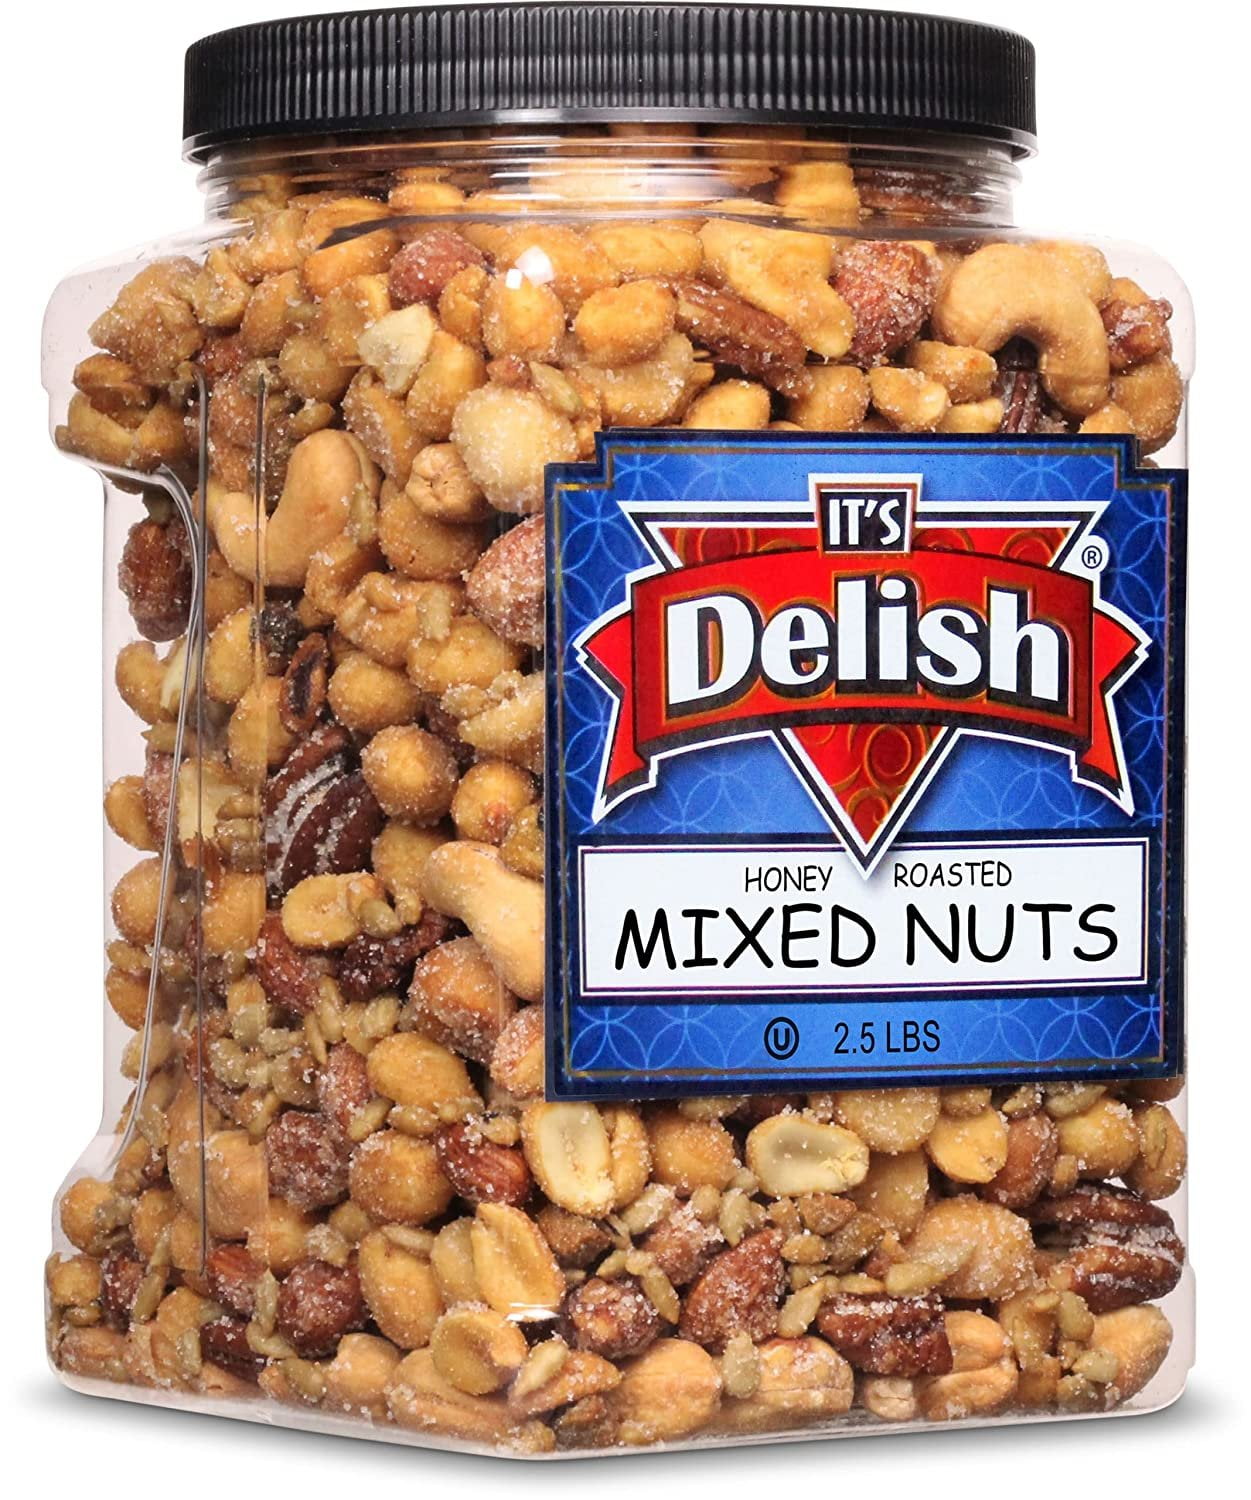 Honey Roasted Mixed Nuts by It's Delish, 2.5 LBS Reusable Jumbo Container  Gourmet Mixed Nuts in Honey Sugar Coating, Sweet & Heart Healthy Salted Nut,  Kids Snack - Non-Dairy, Kosher Parve 